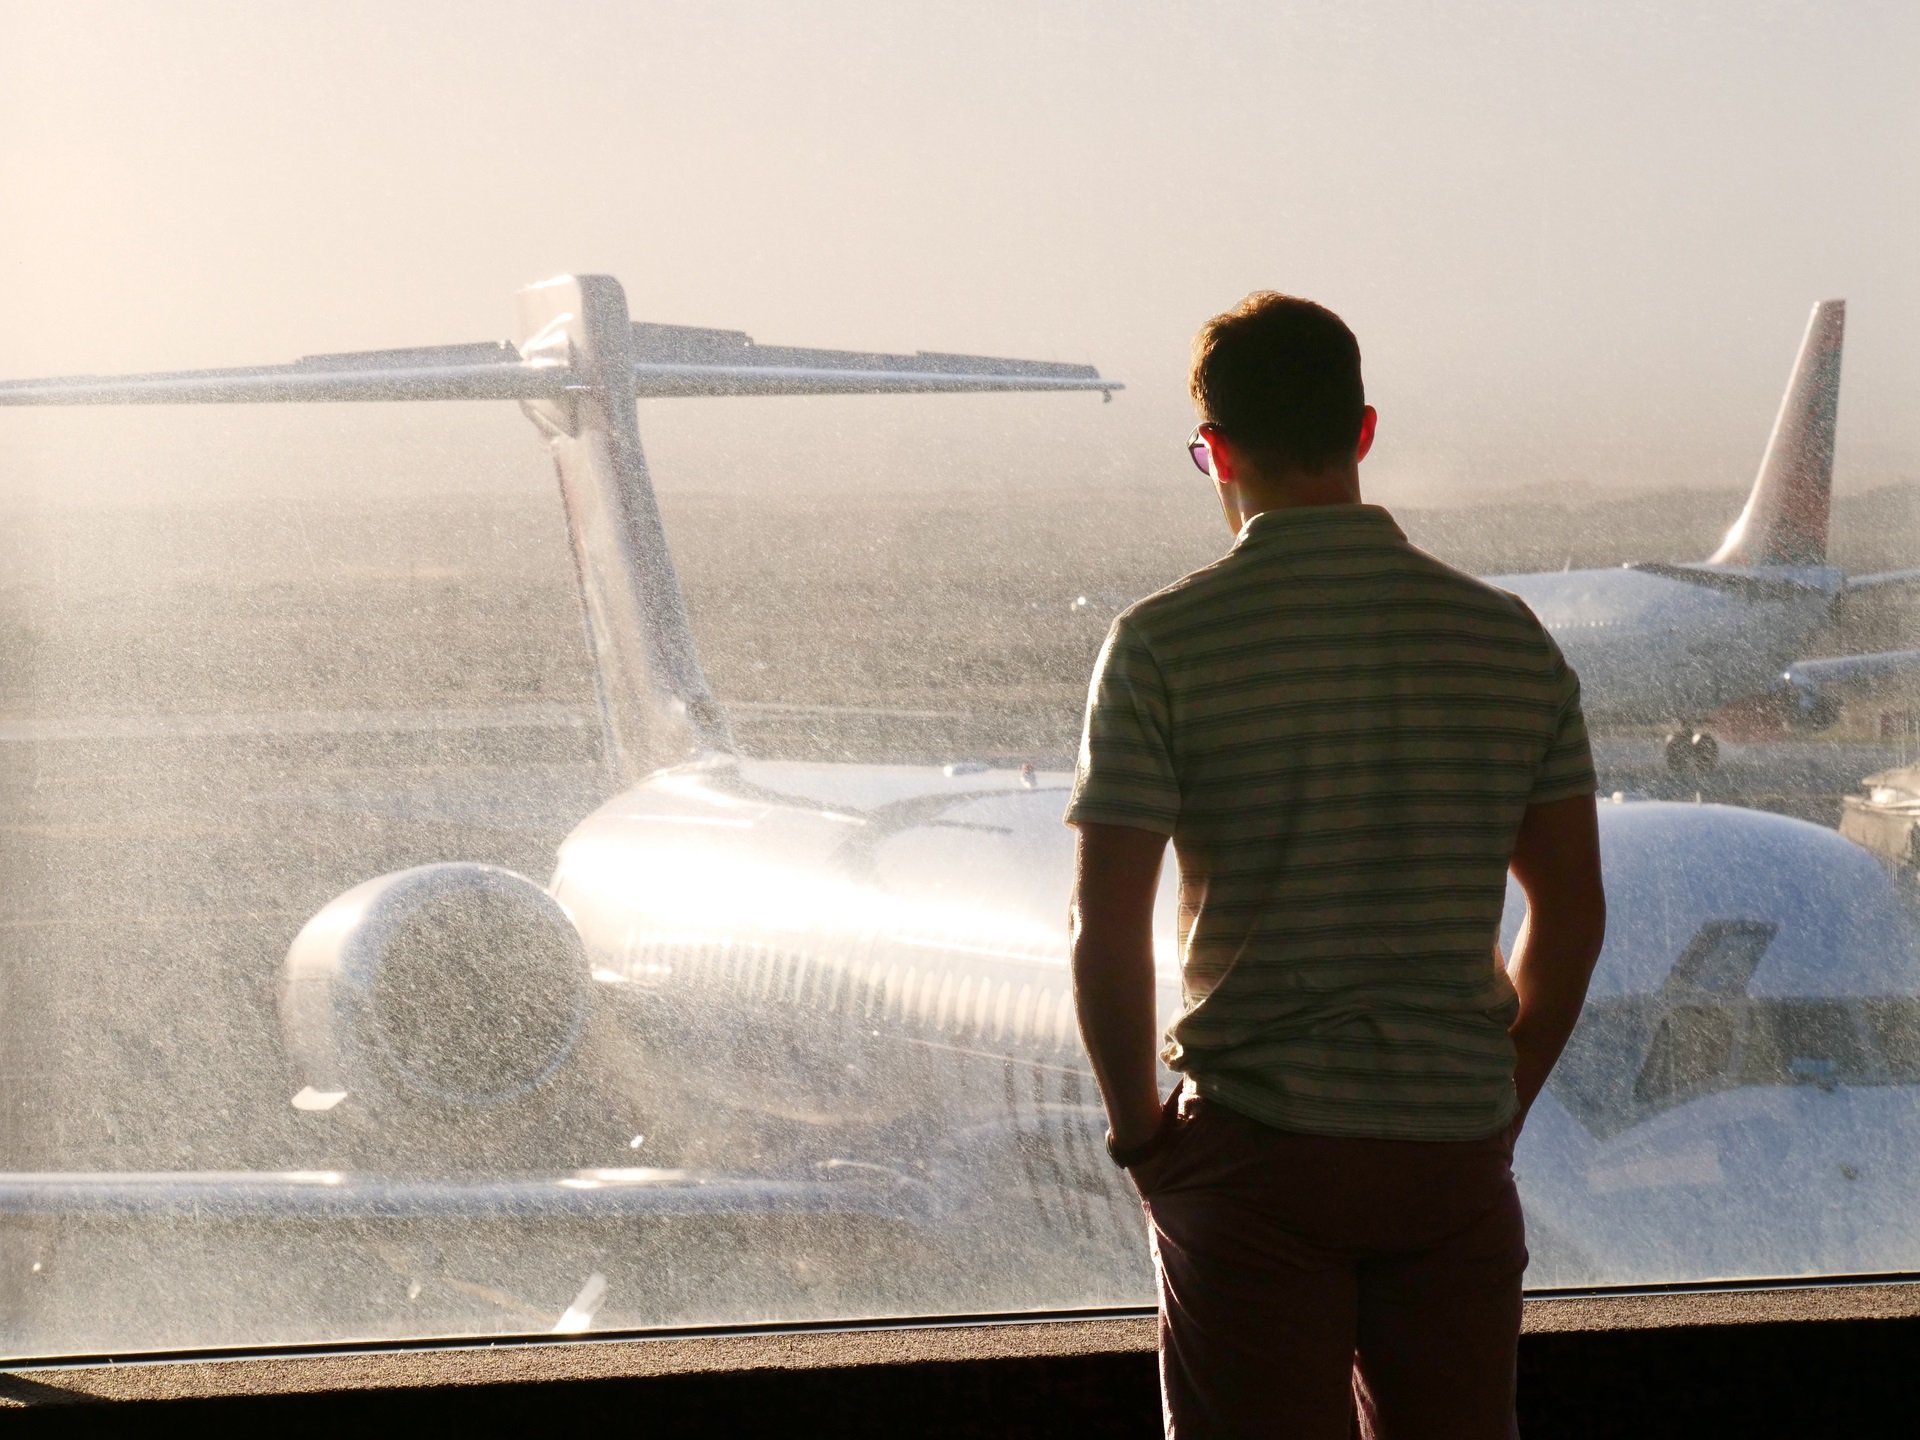 The White Lotus Season 1 Episode 6 with Jake Lacy as Shane Patton looking out at a plane